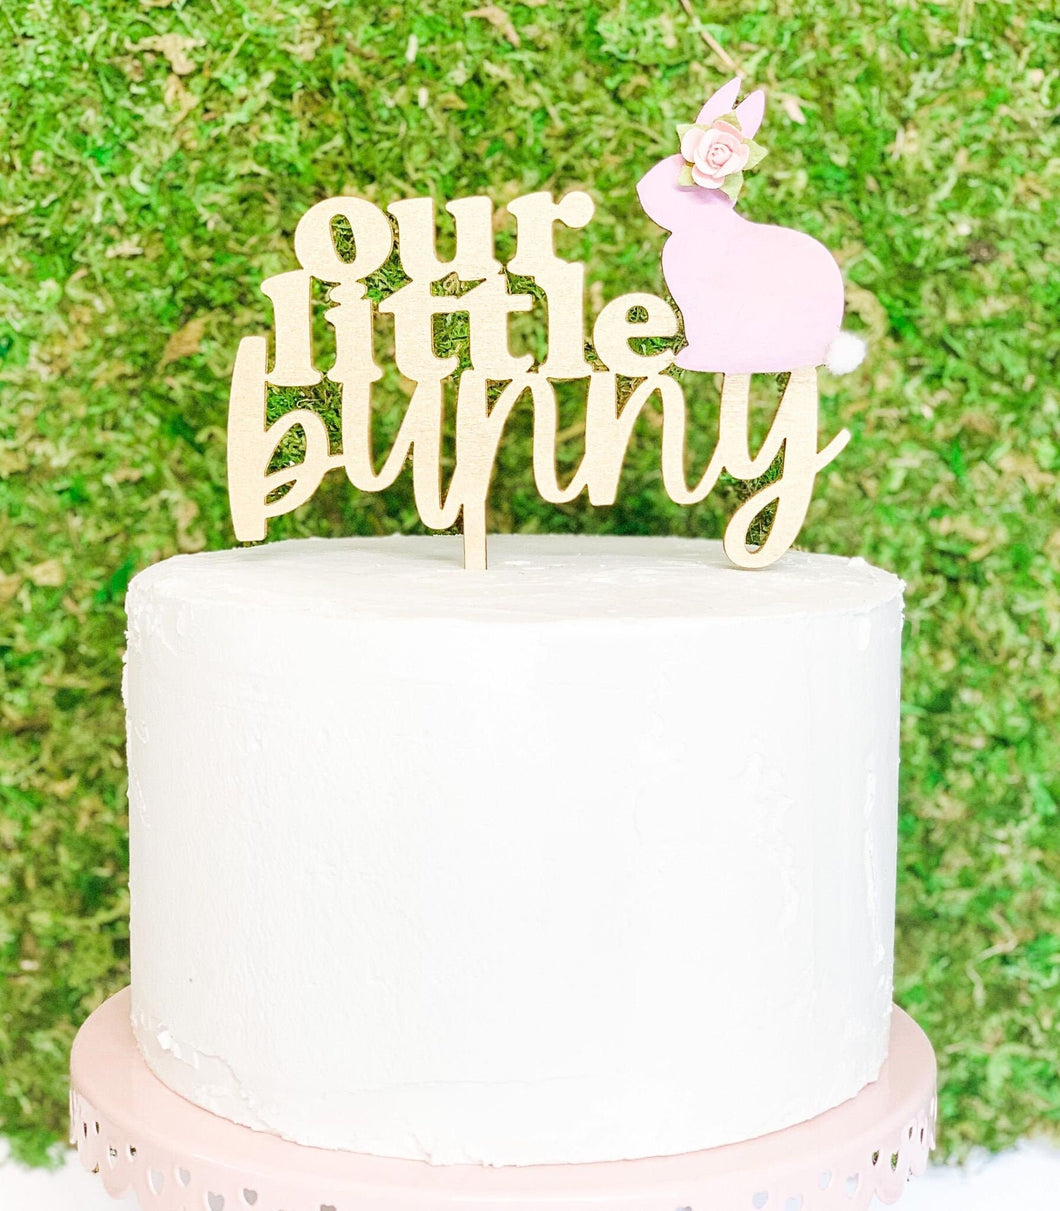 Bunny Cake Topper - Our Little Bunny Baby Shower - Pink Bunny Cake Topper - Floral Cake Topper - Our Bunny Is One - 1st Birthday